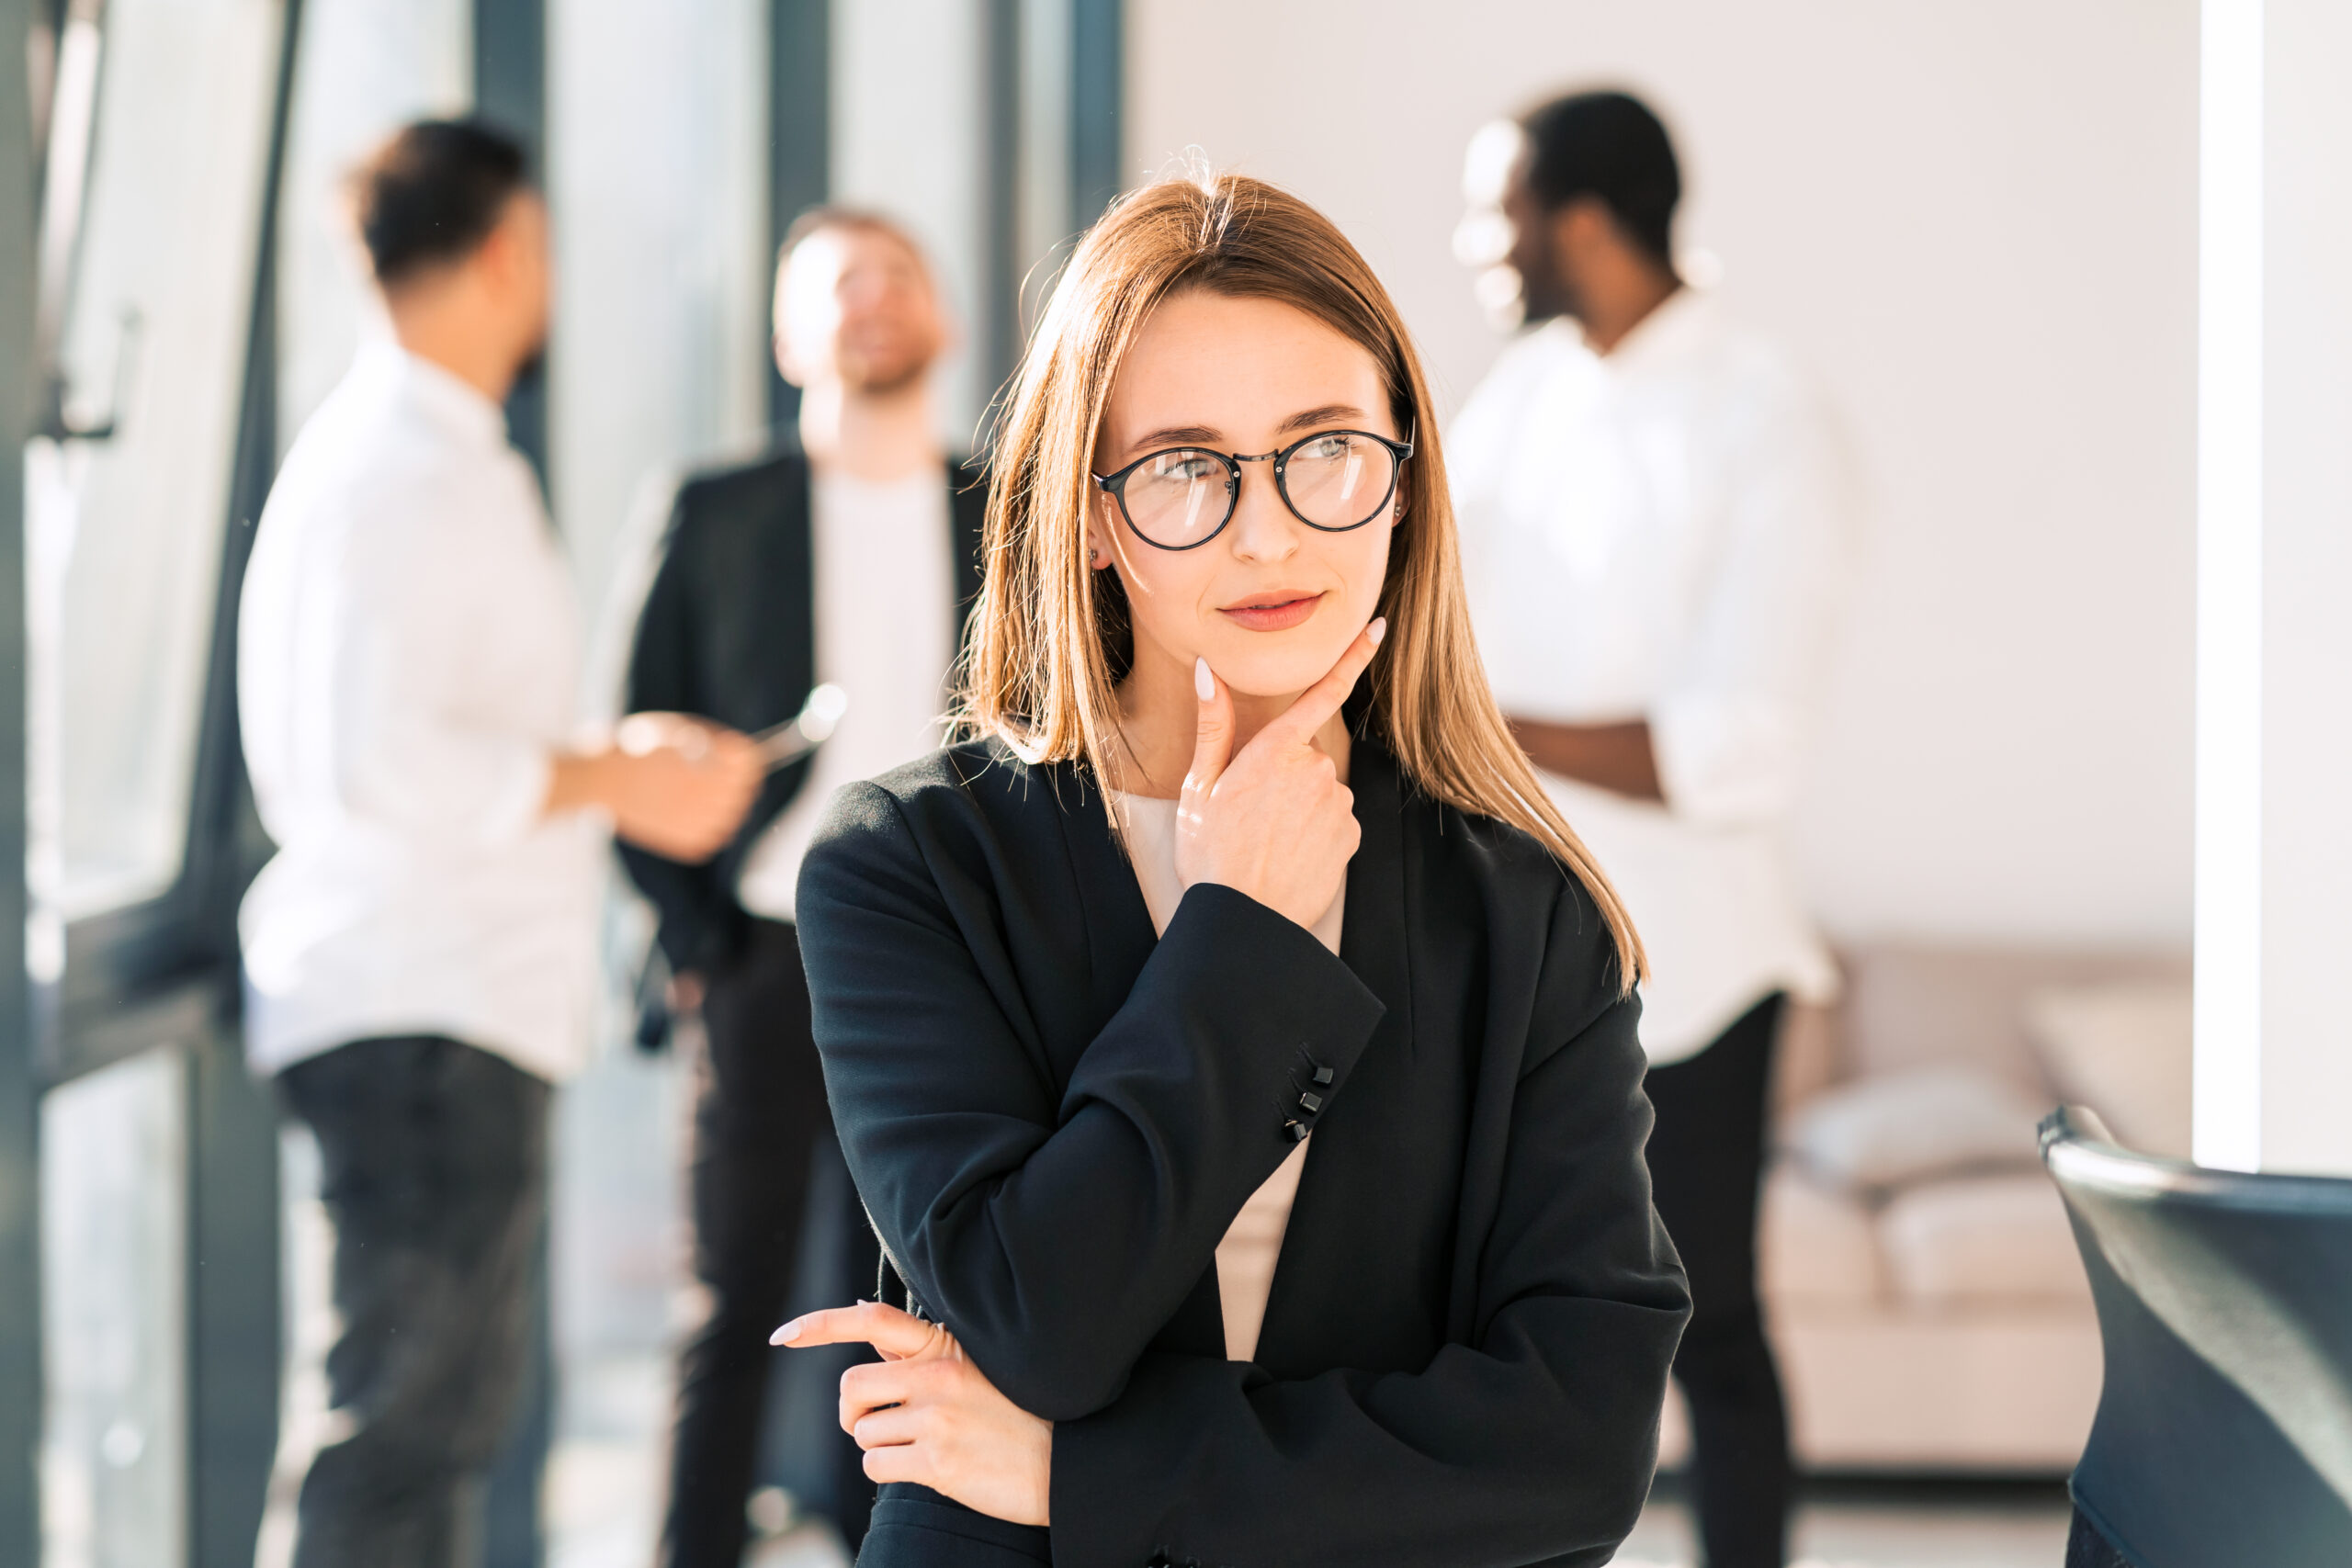 business woman pondering thought leadership strategy